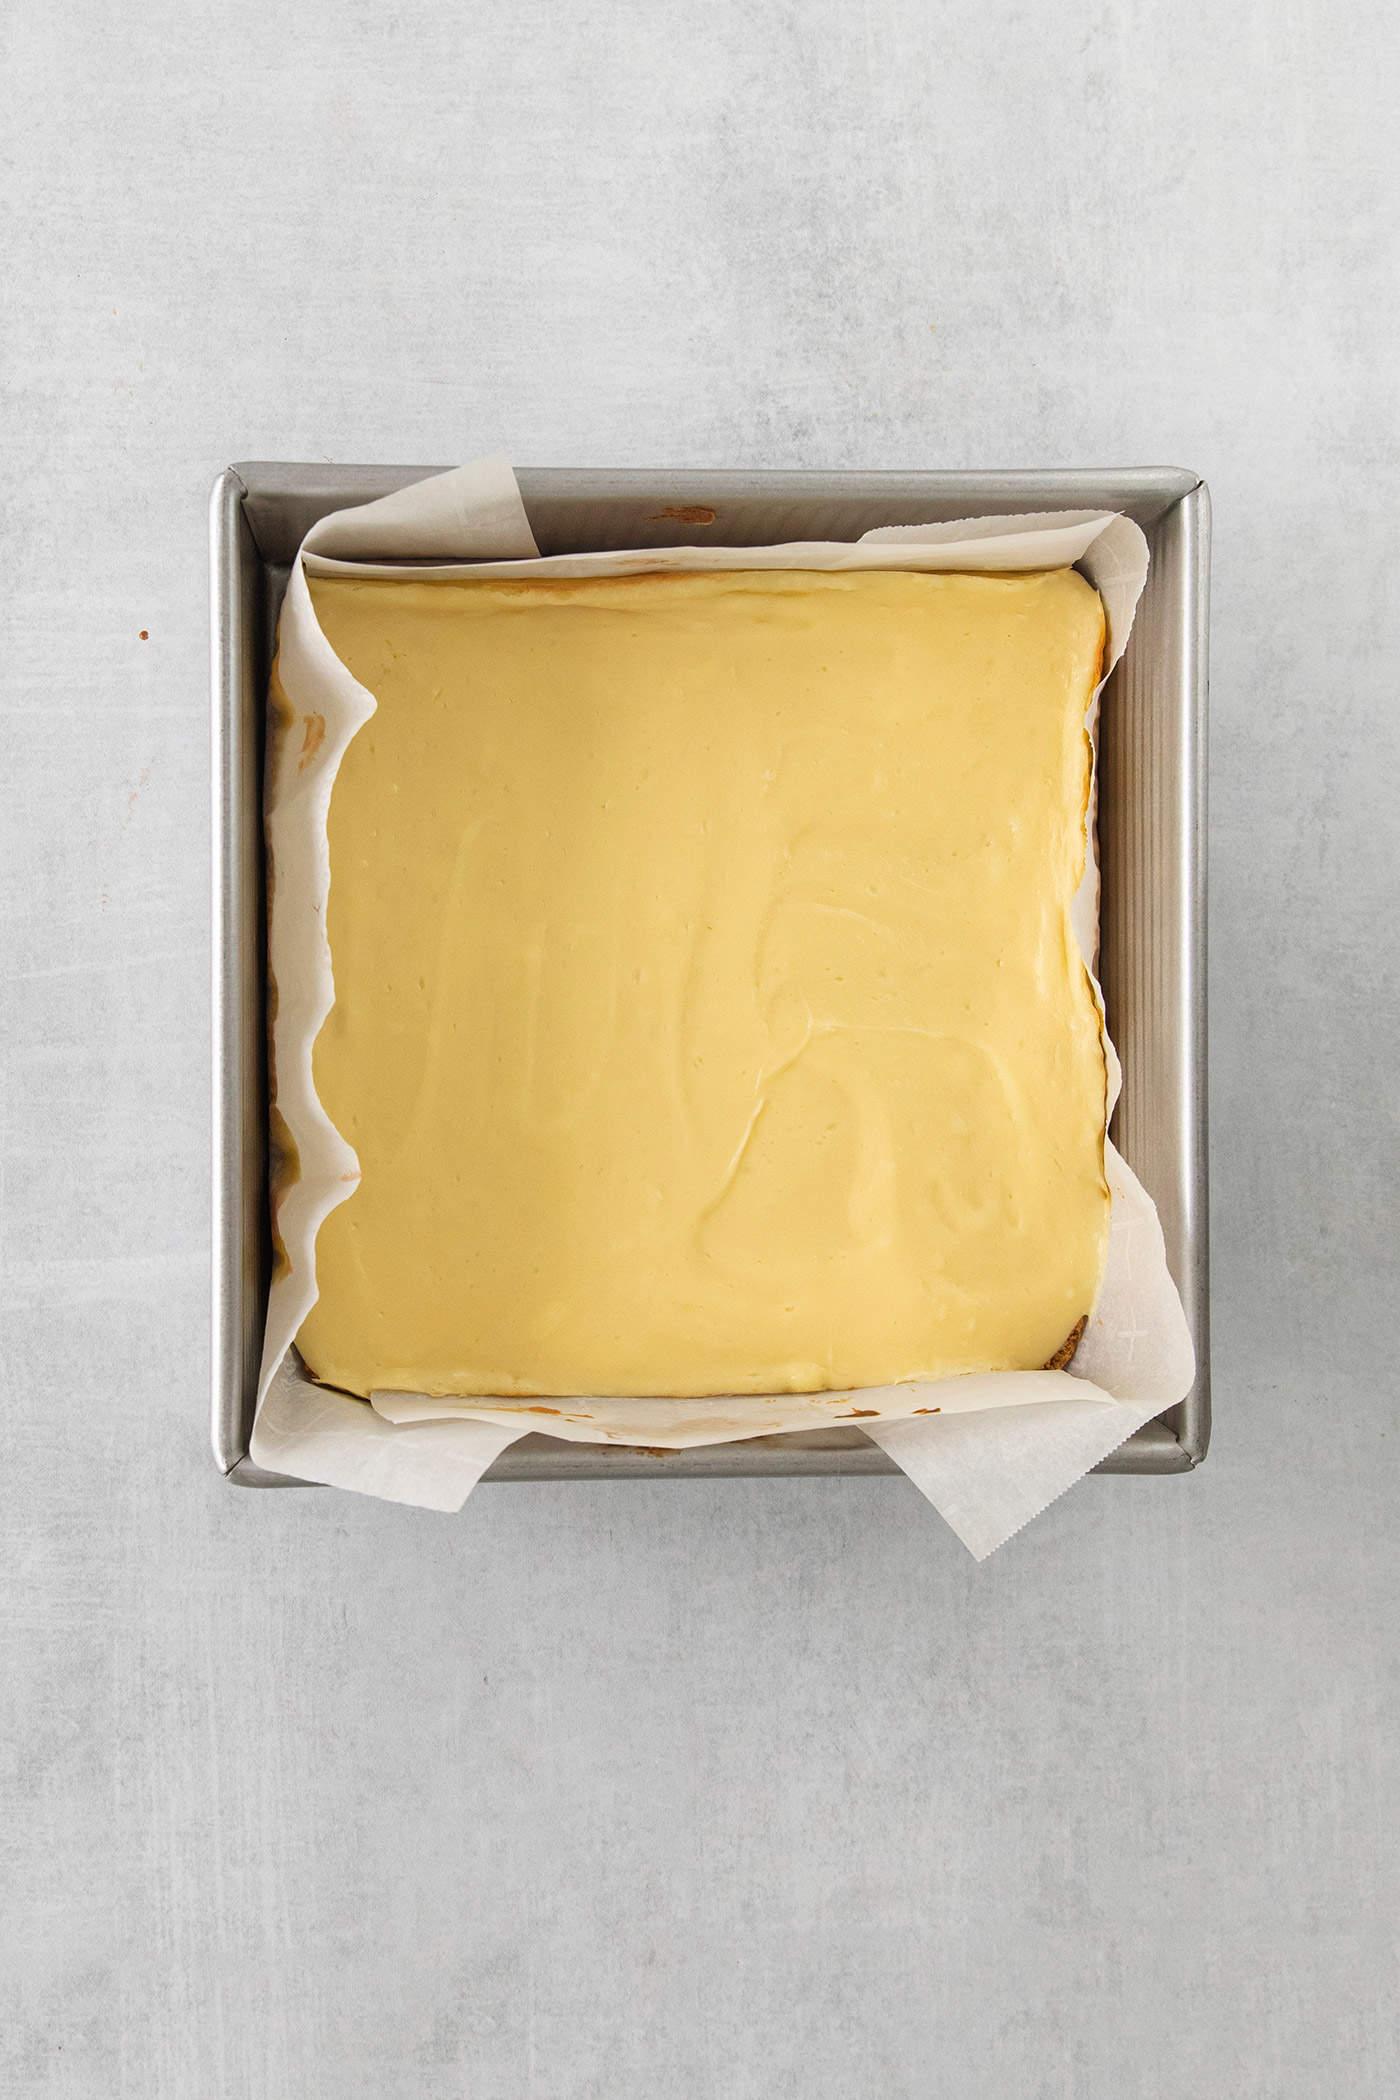 Cheesecake filling is spread in square baking pan.